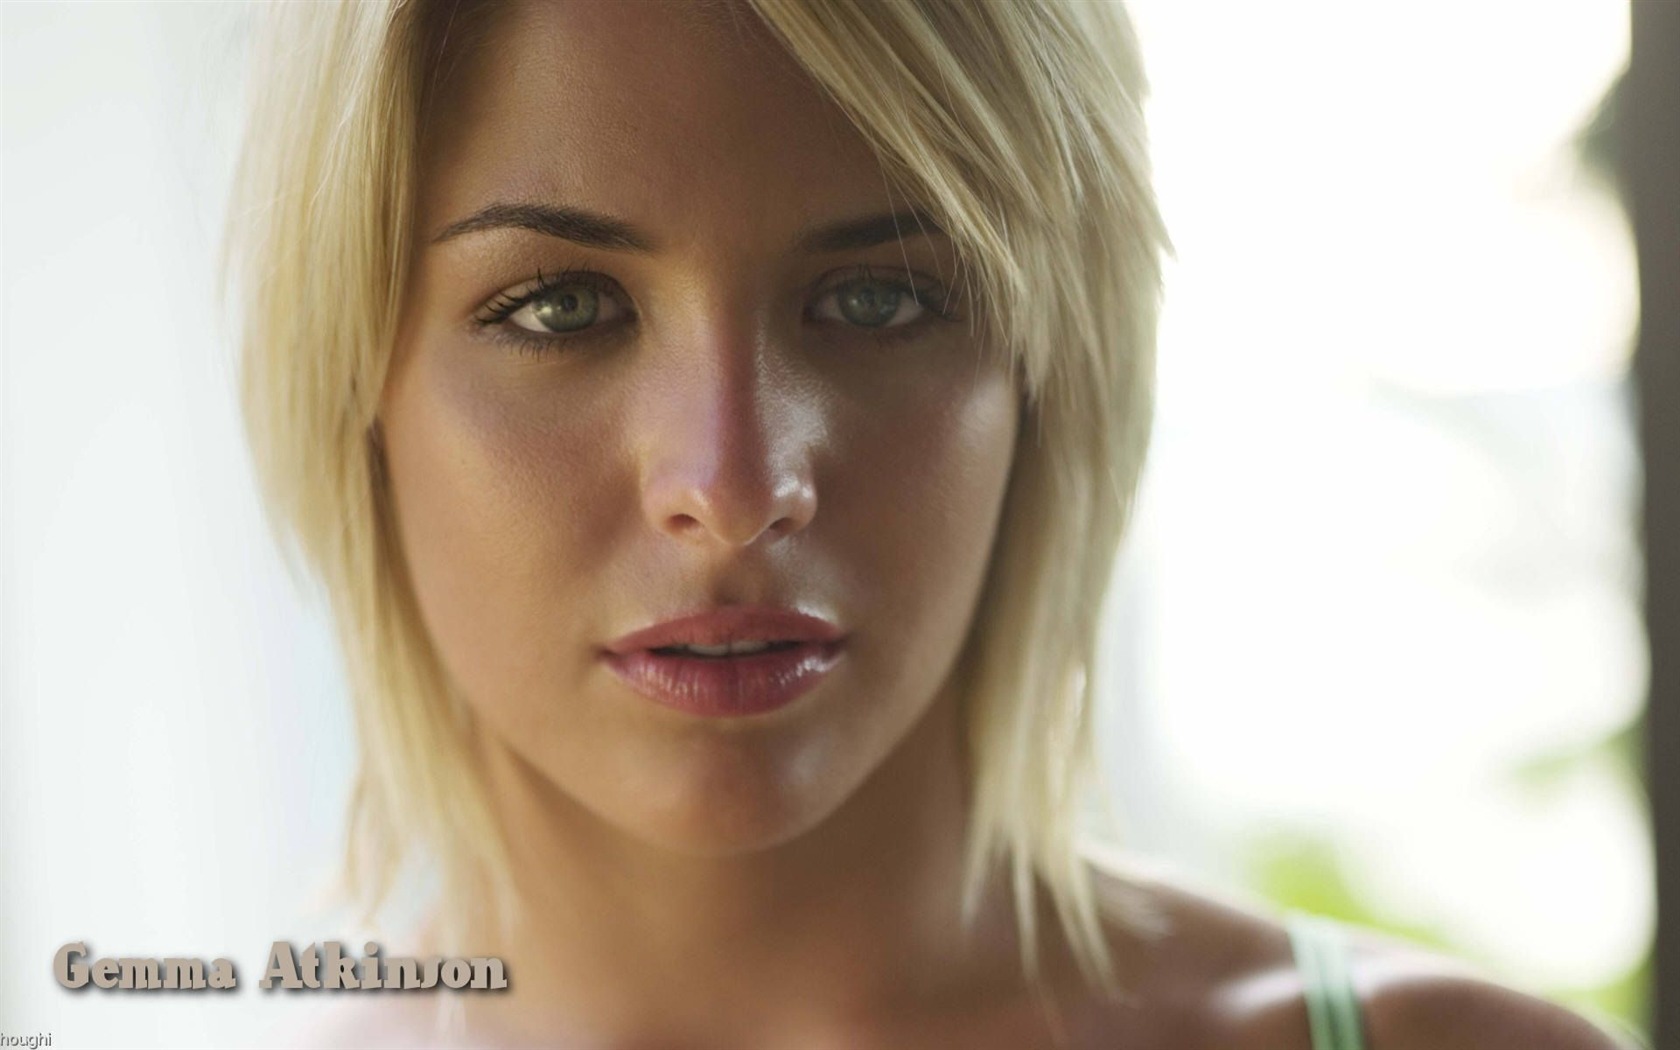 Gemma Atkinson #022 - 1680x1050 Wallpapers Pictures Photos Images